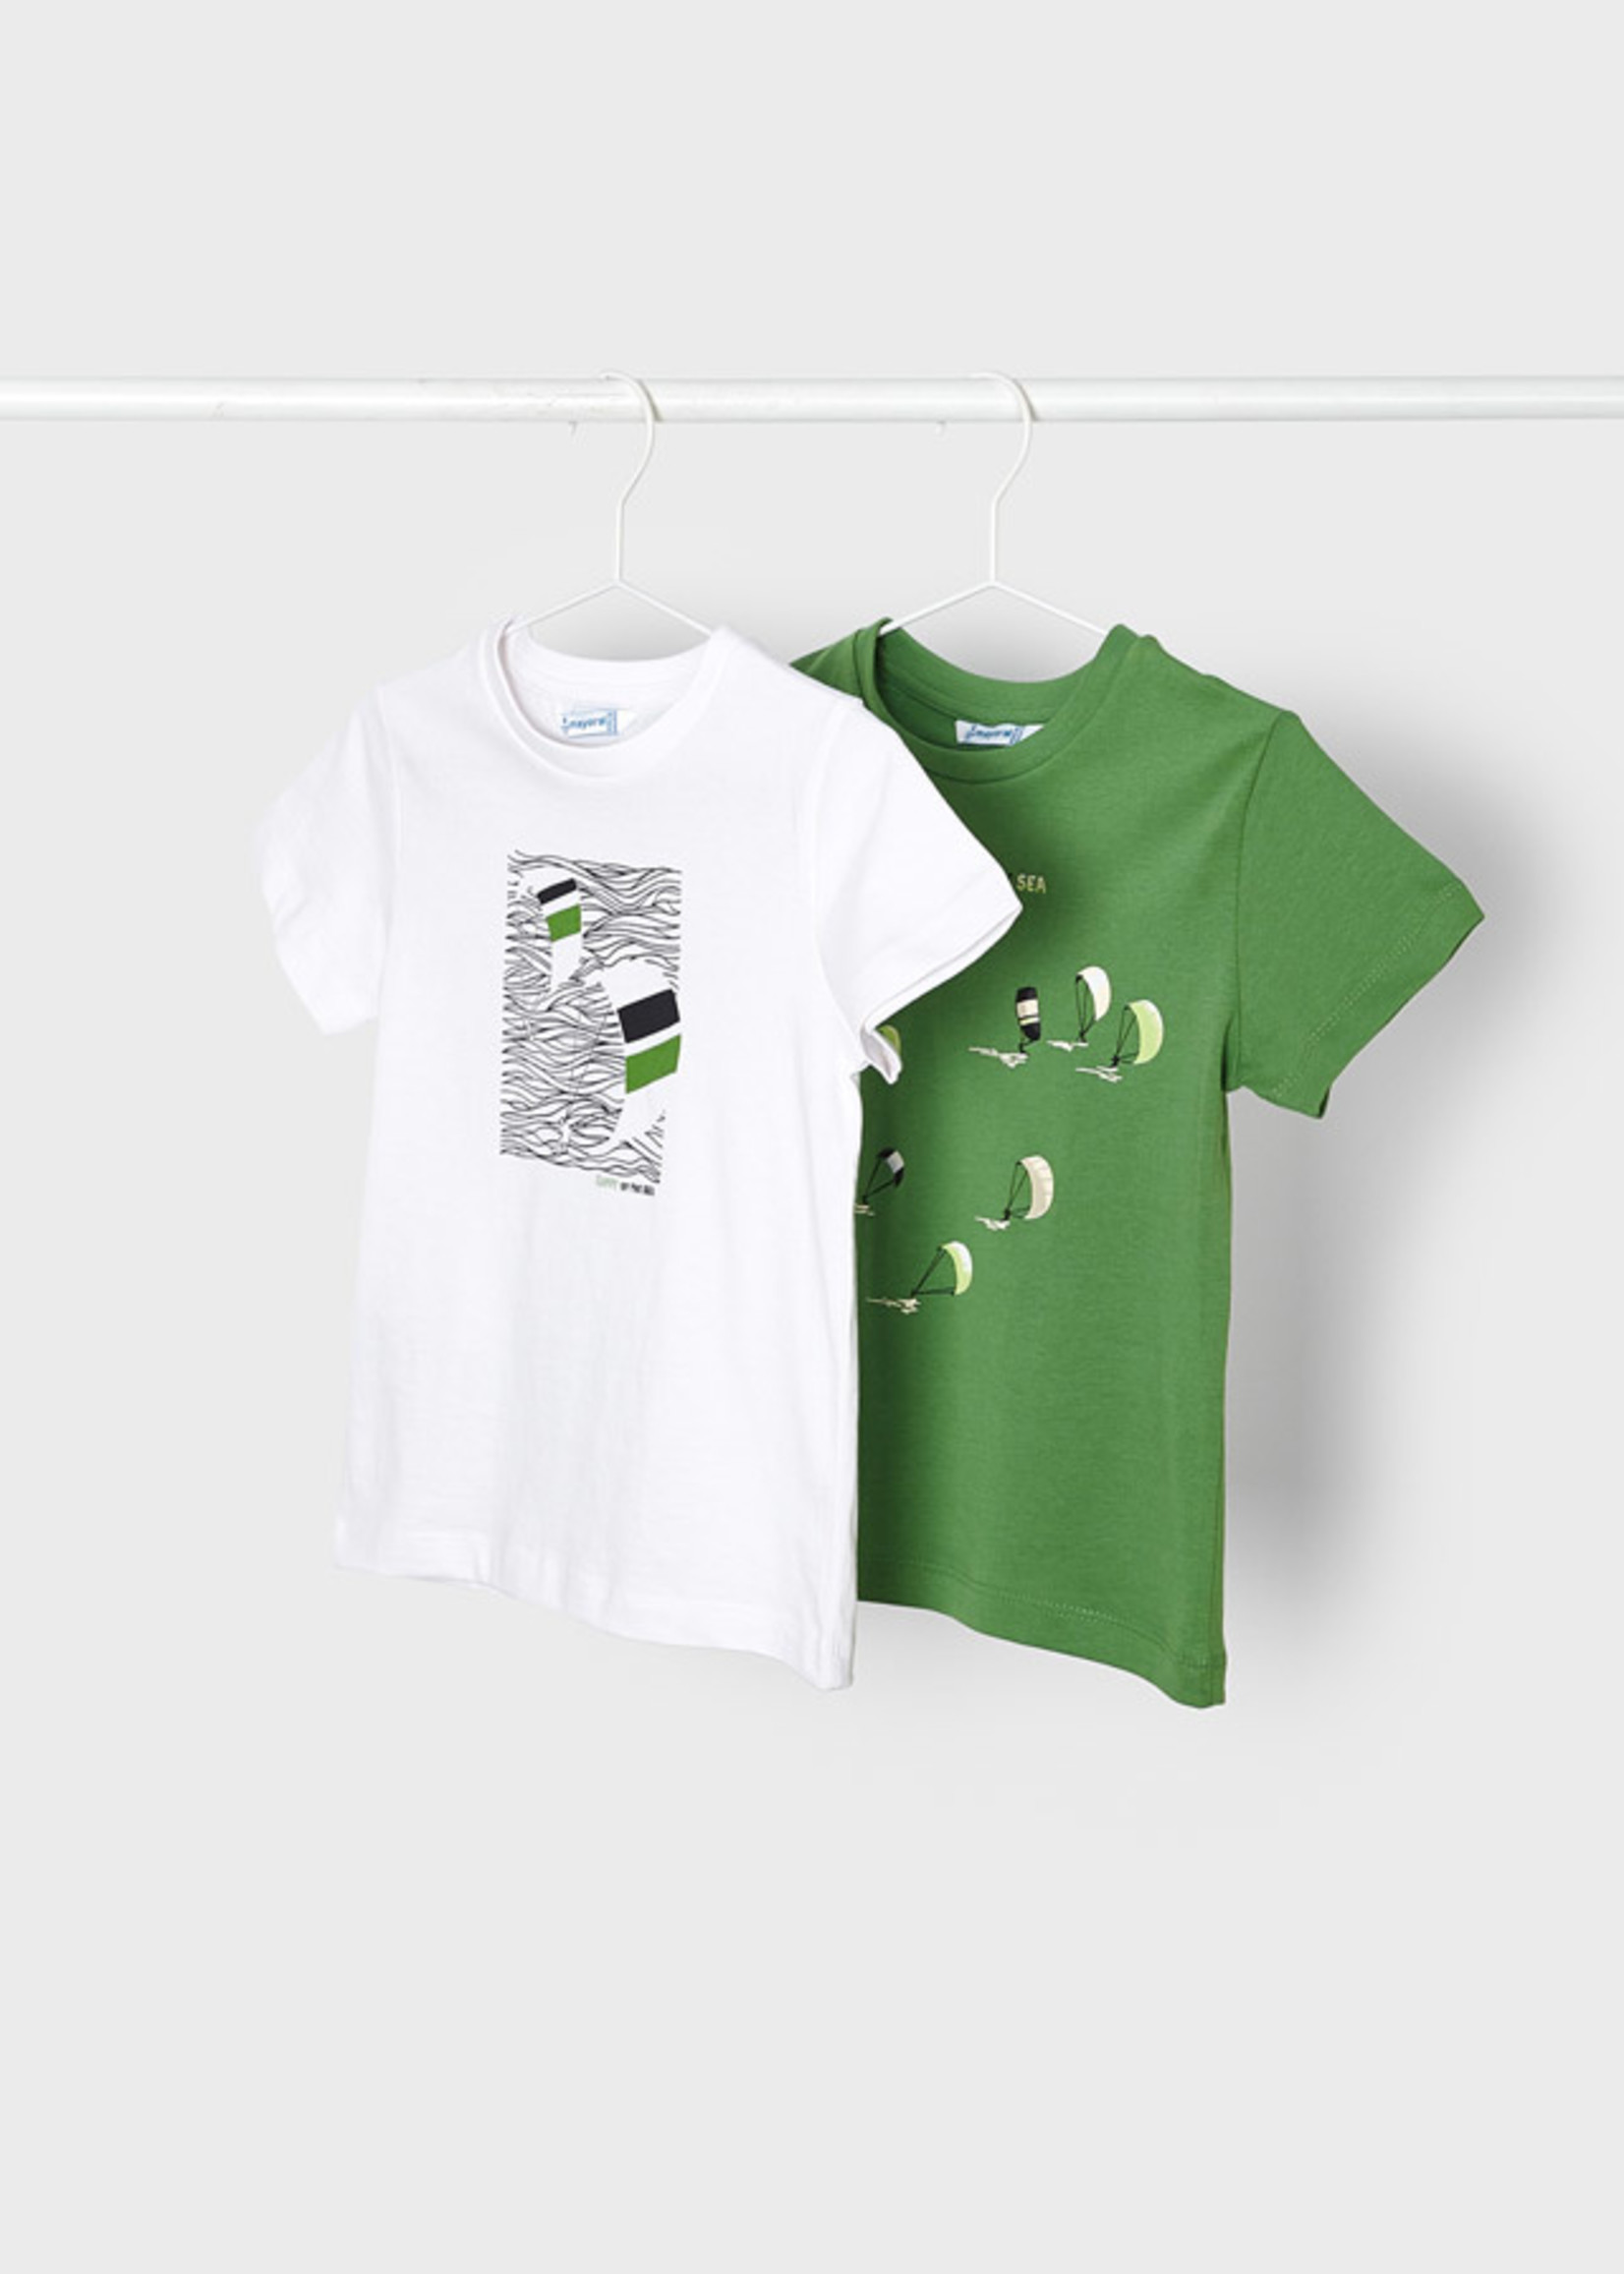 Mayoral 1135 Mini Boy             2 s/s solid t-shirt sets      Green